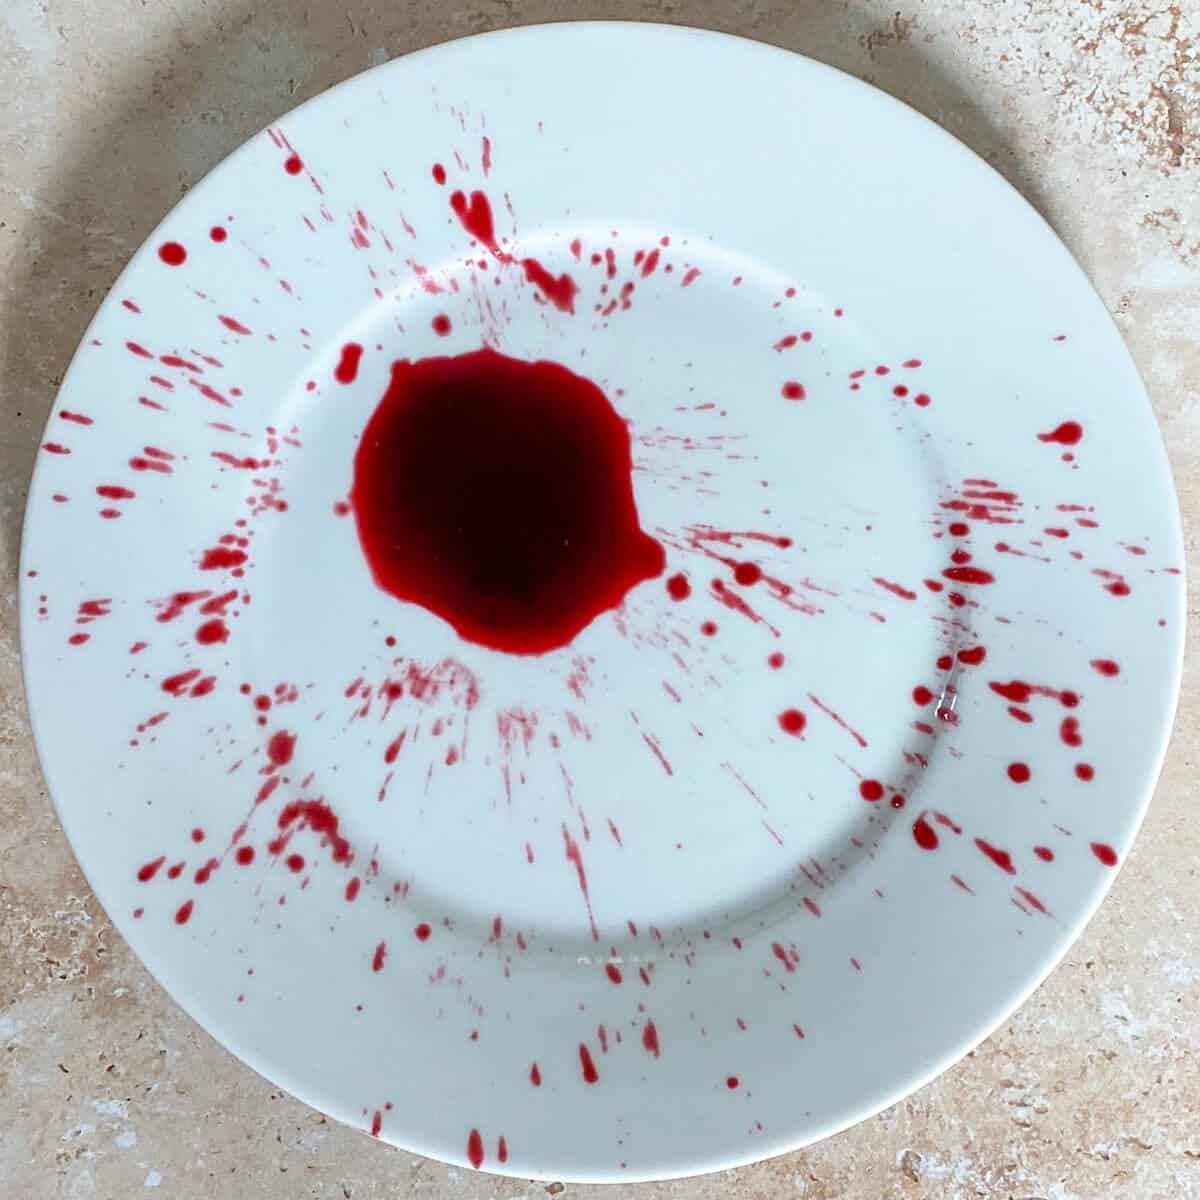 Sauce decorating a plate 